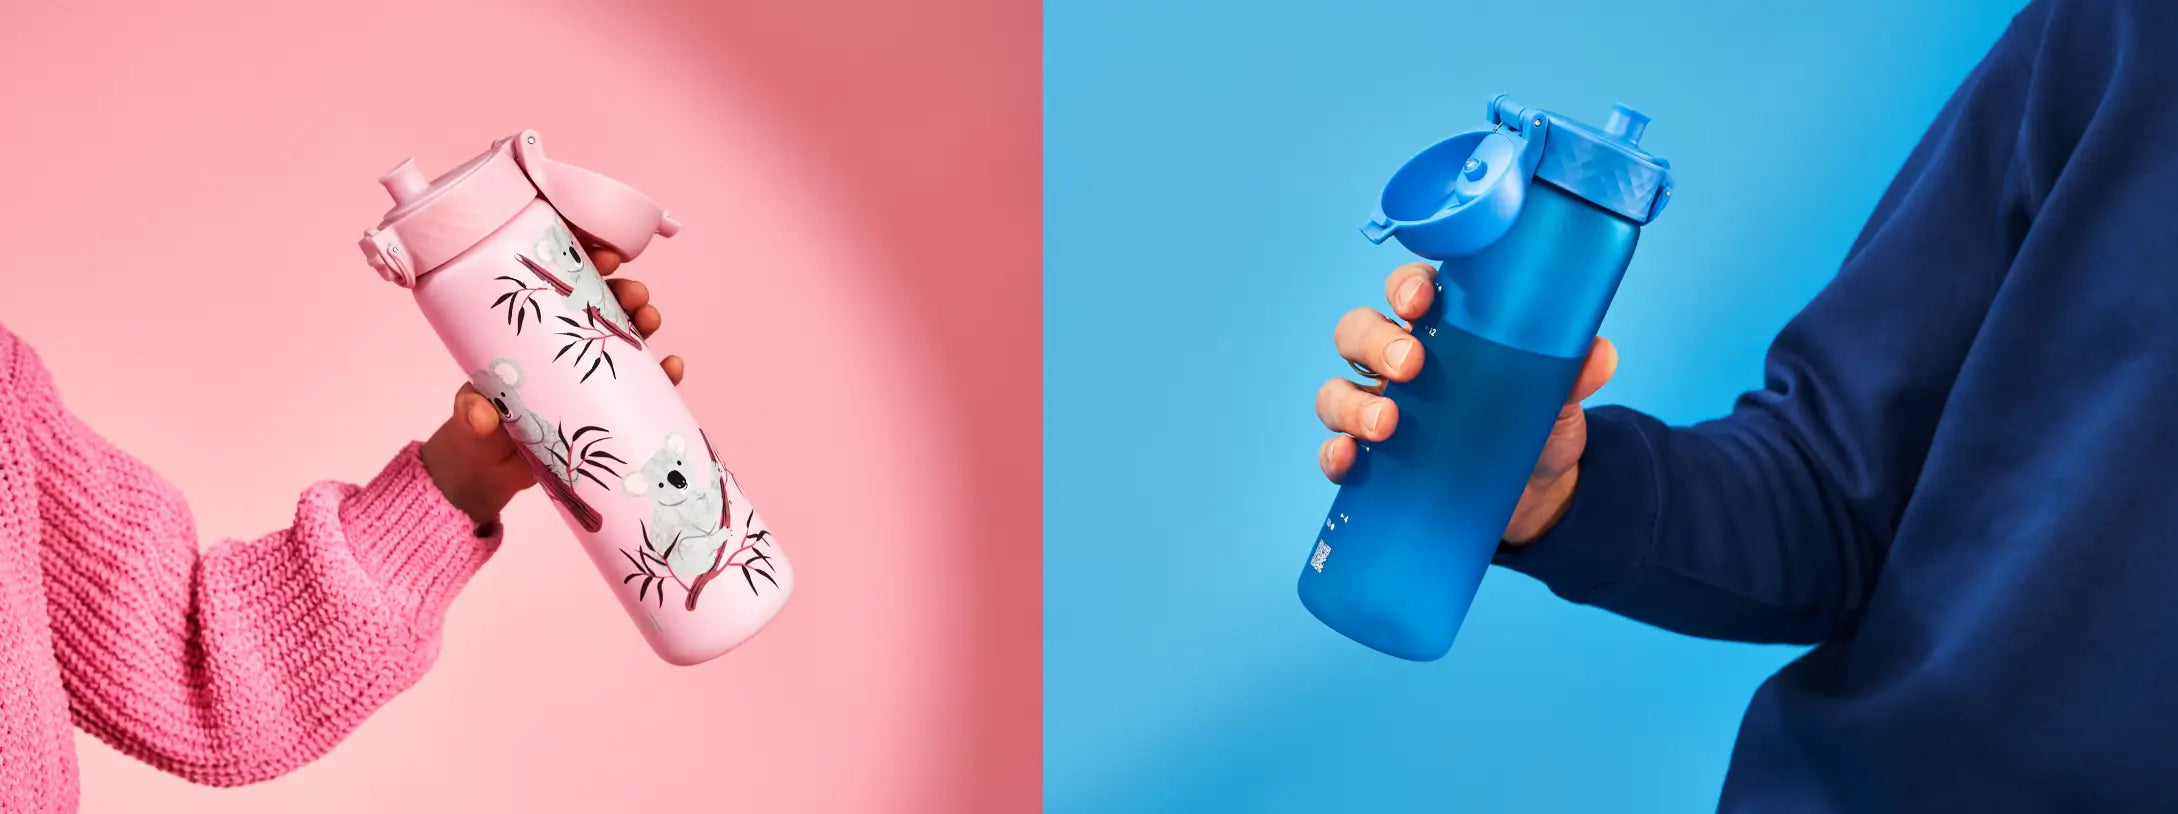 Pink and Blue bottle being held by a boy and a girl in widescreen size